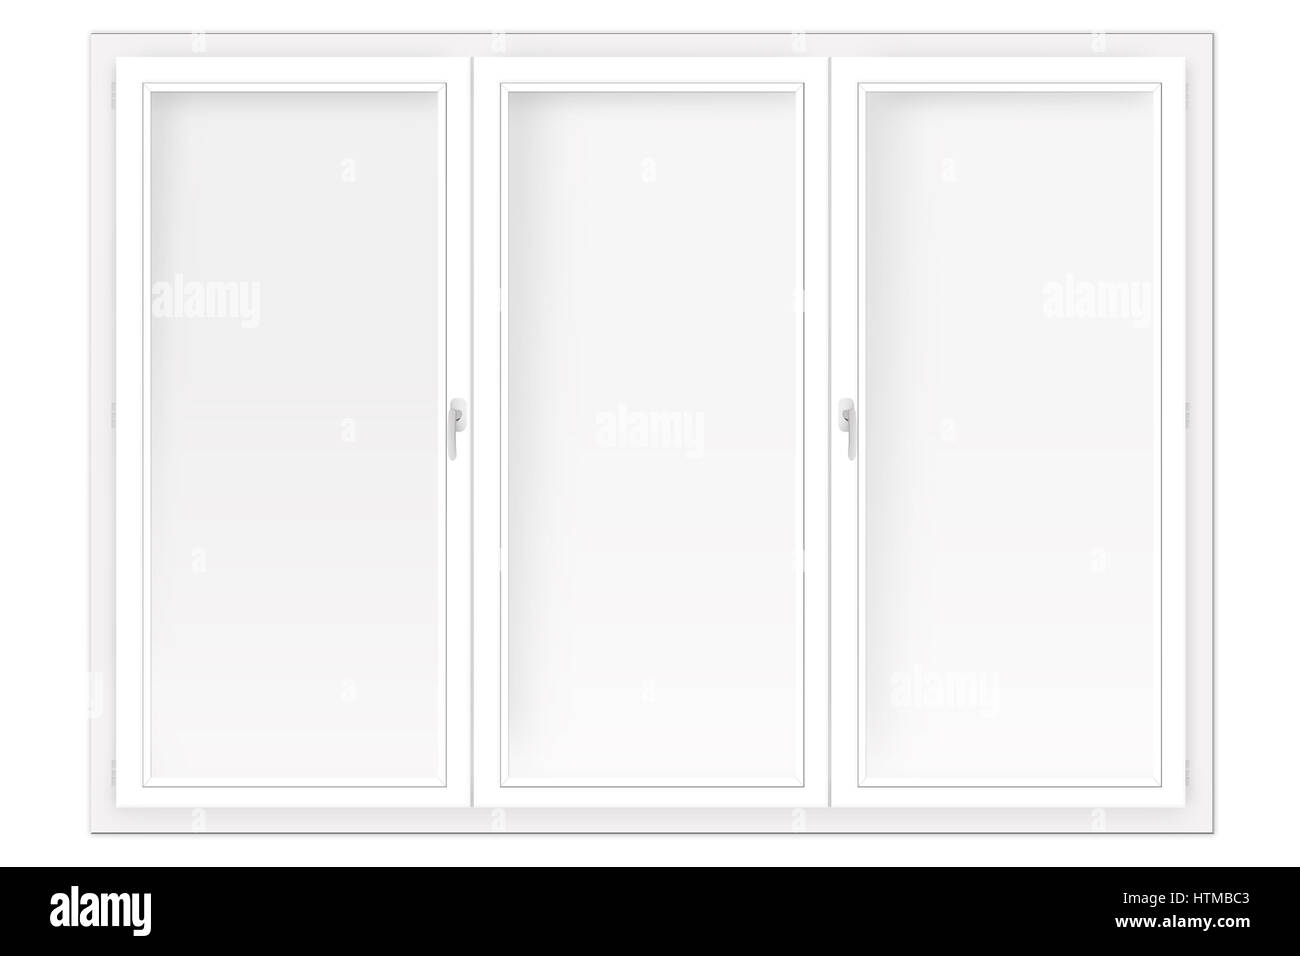 three-leaved window isolated on the white background Stock Photo